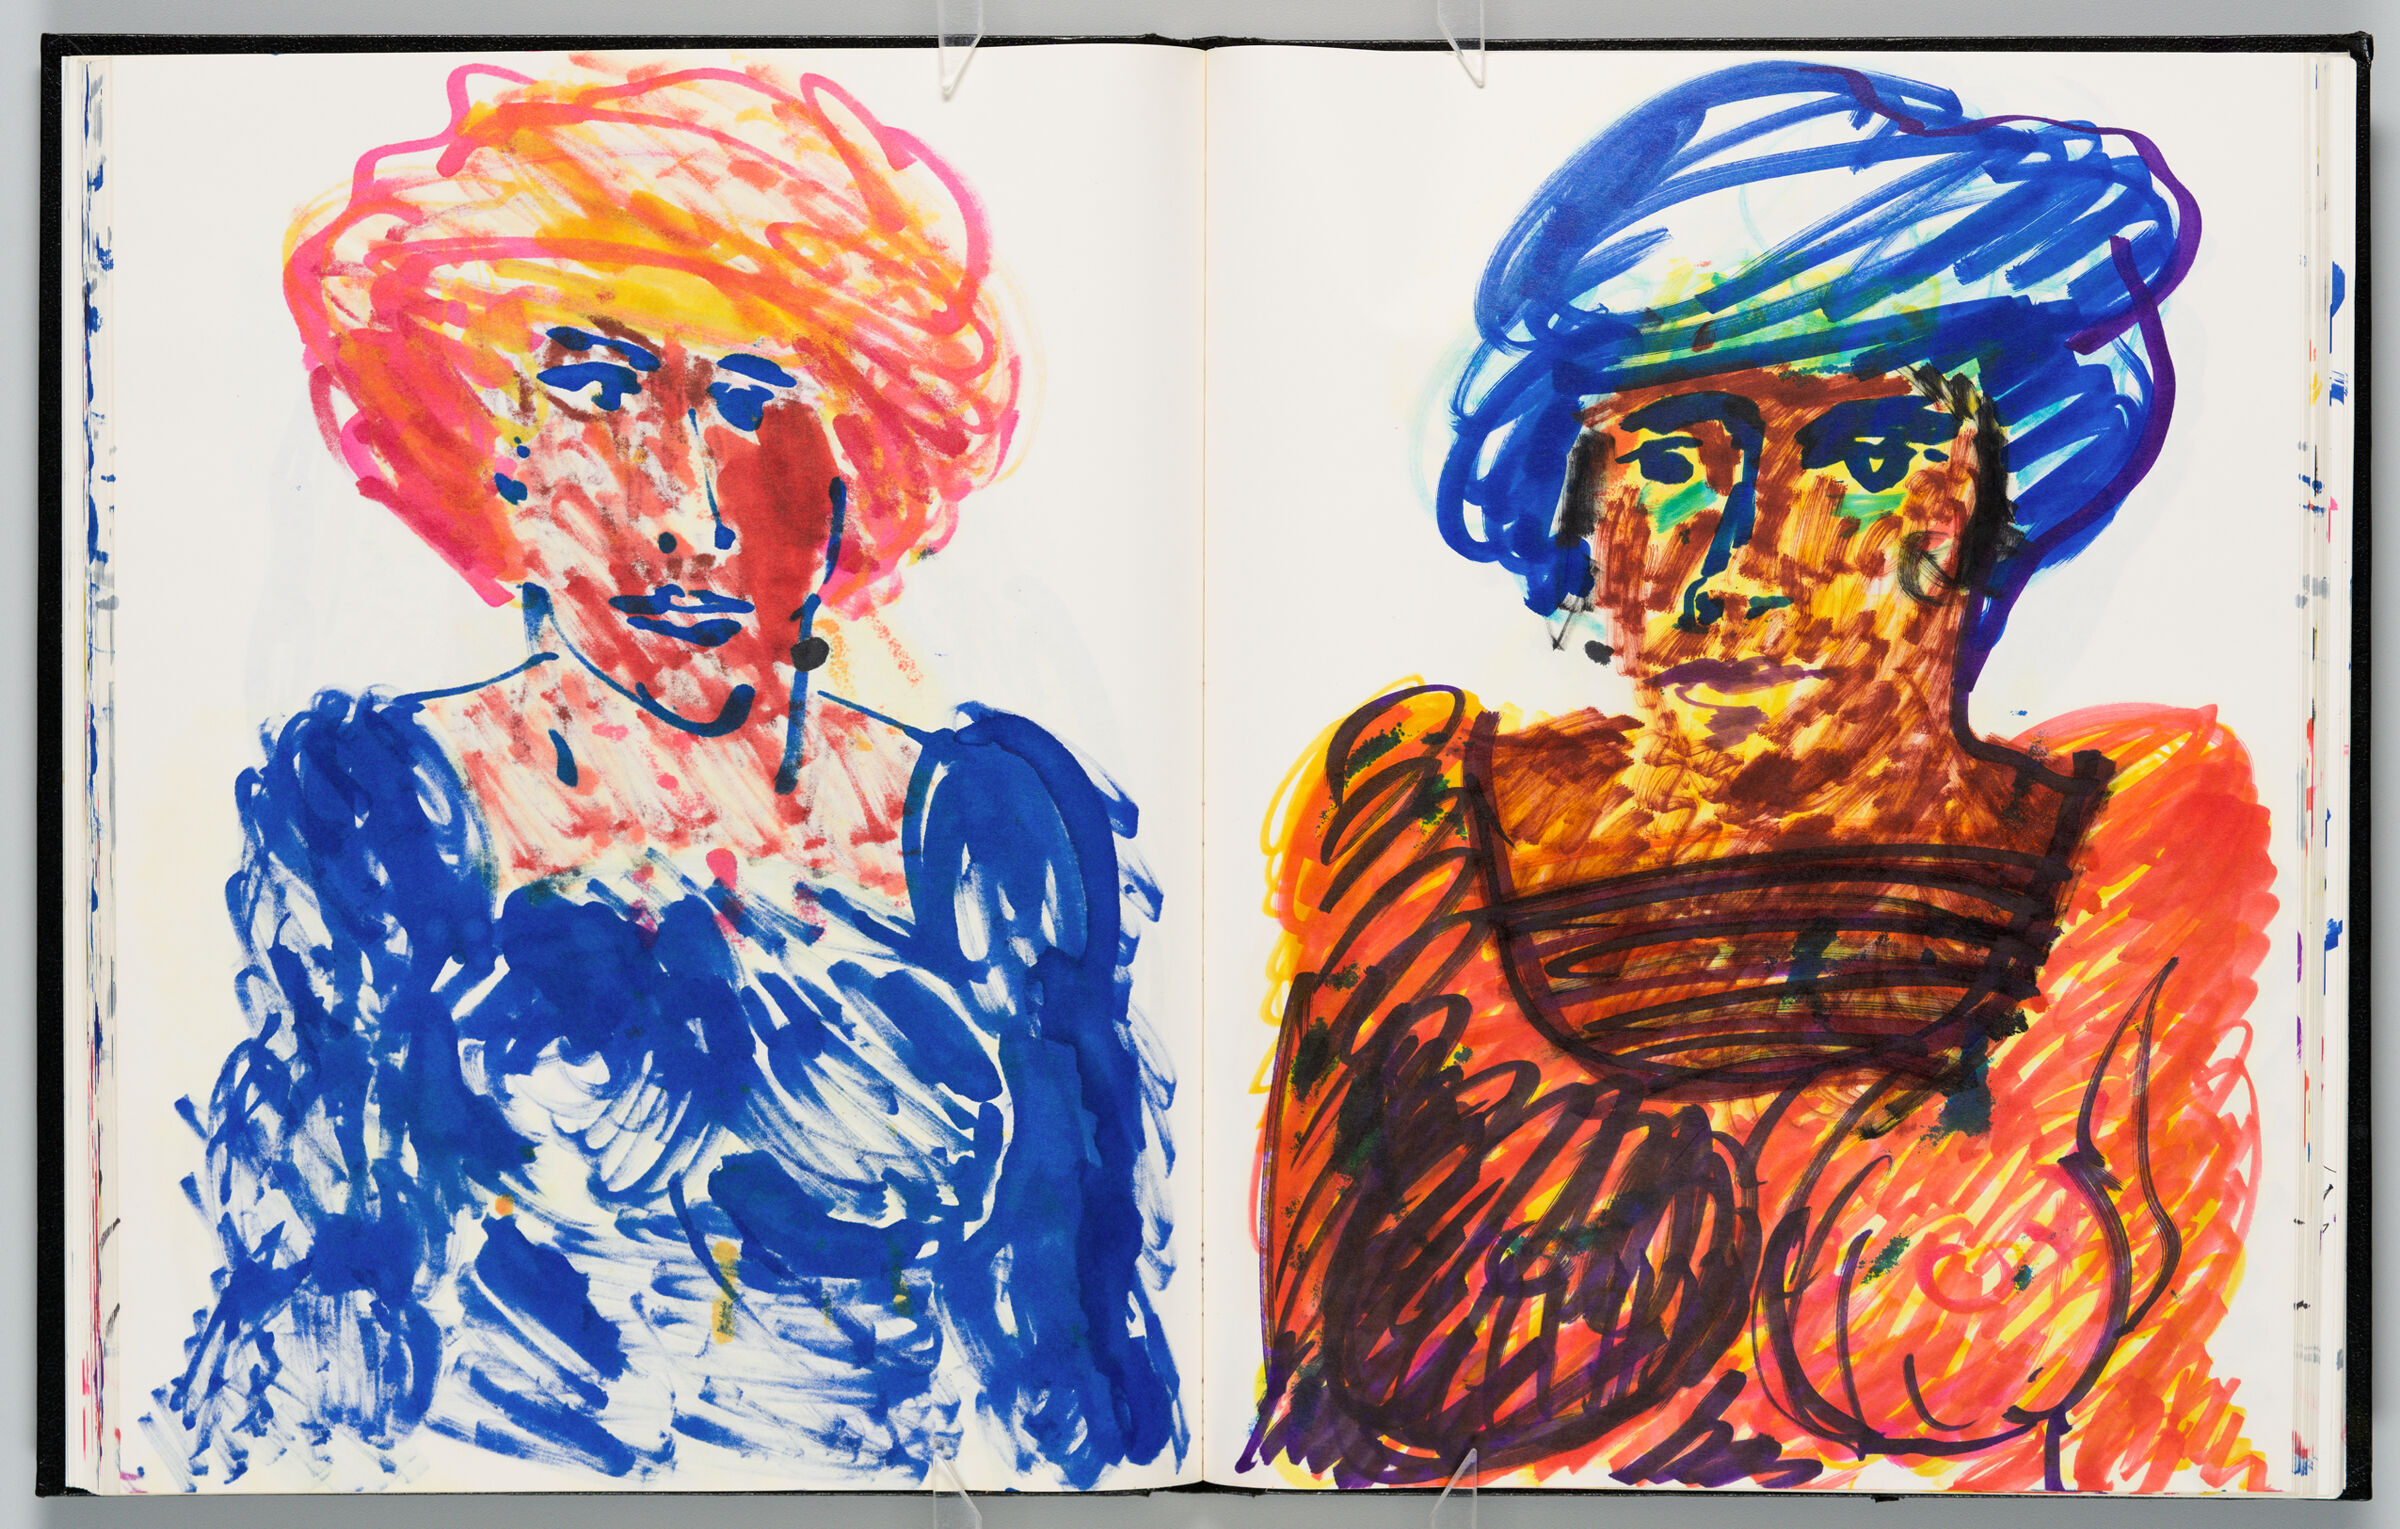 Untitled (Bleed-Through Of Previous Page, Left Page); Untitled (Portrait Of Female Figure, Right Page)